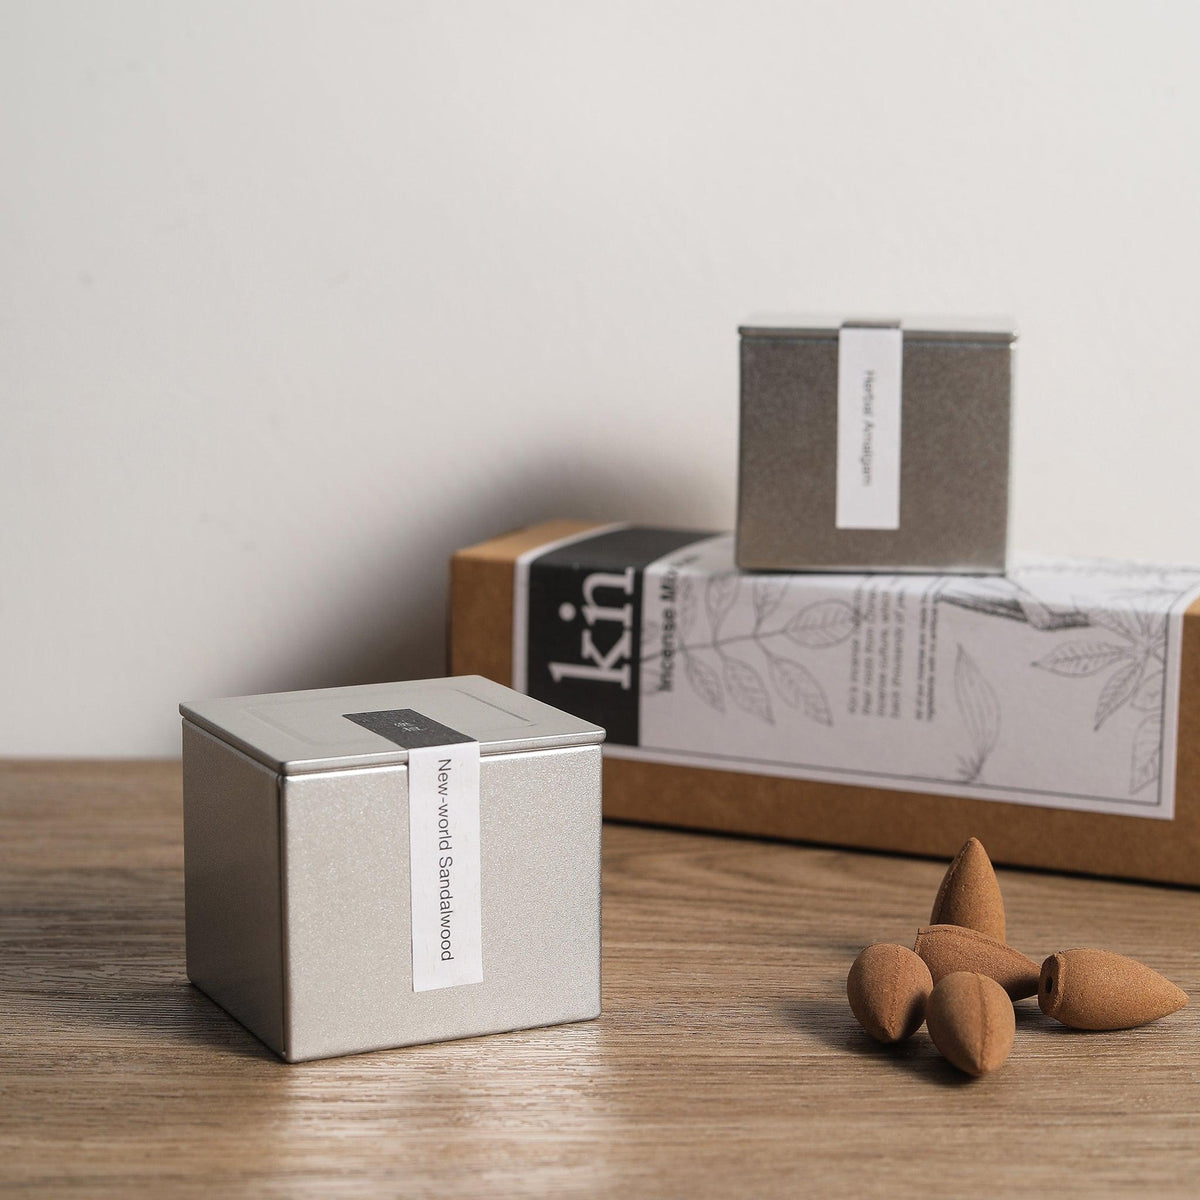 Backflow Incense Cones and Incense Stick Boxes by Kin Objects